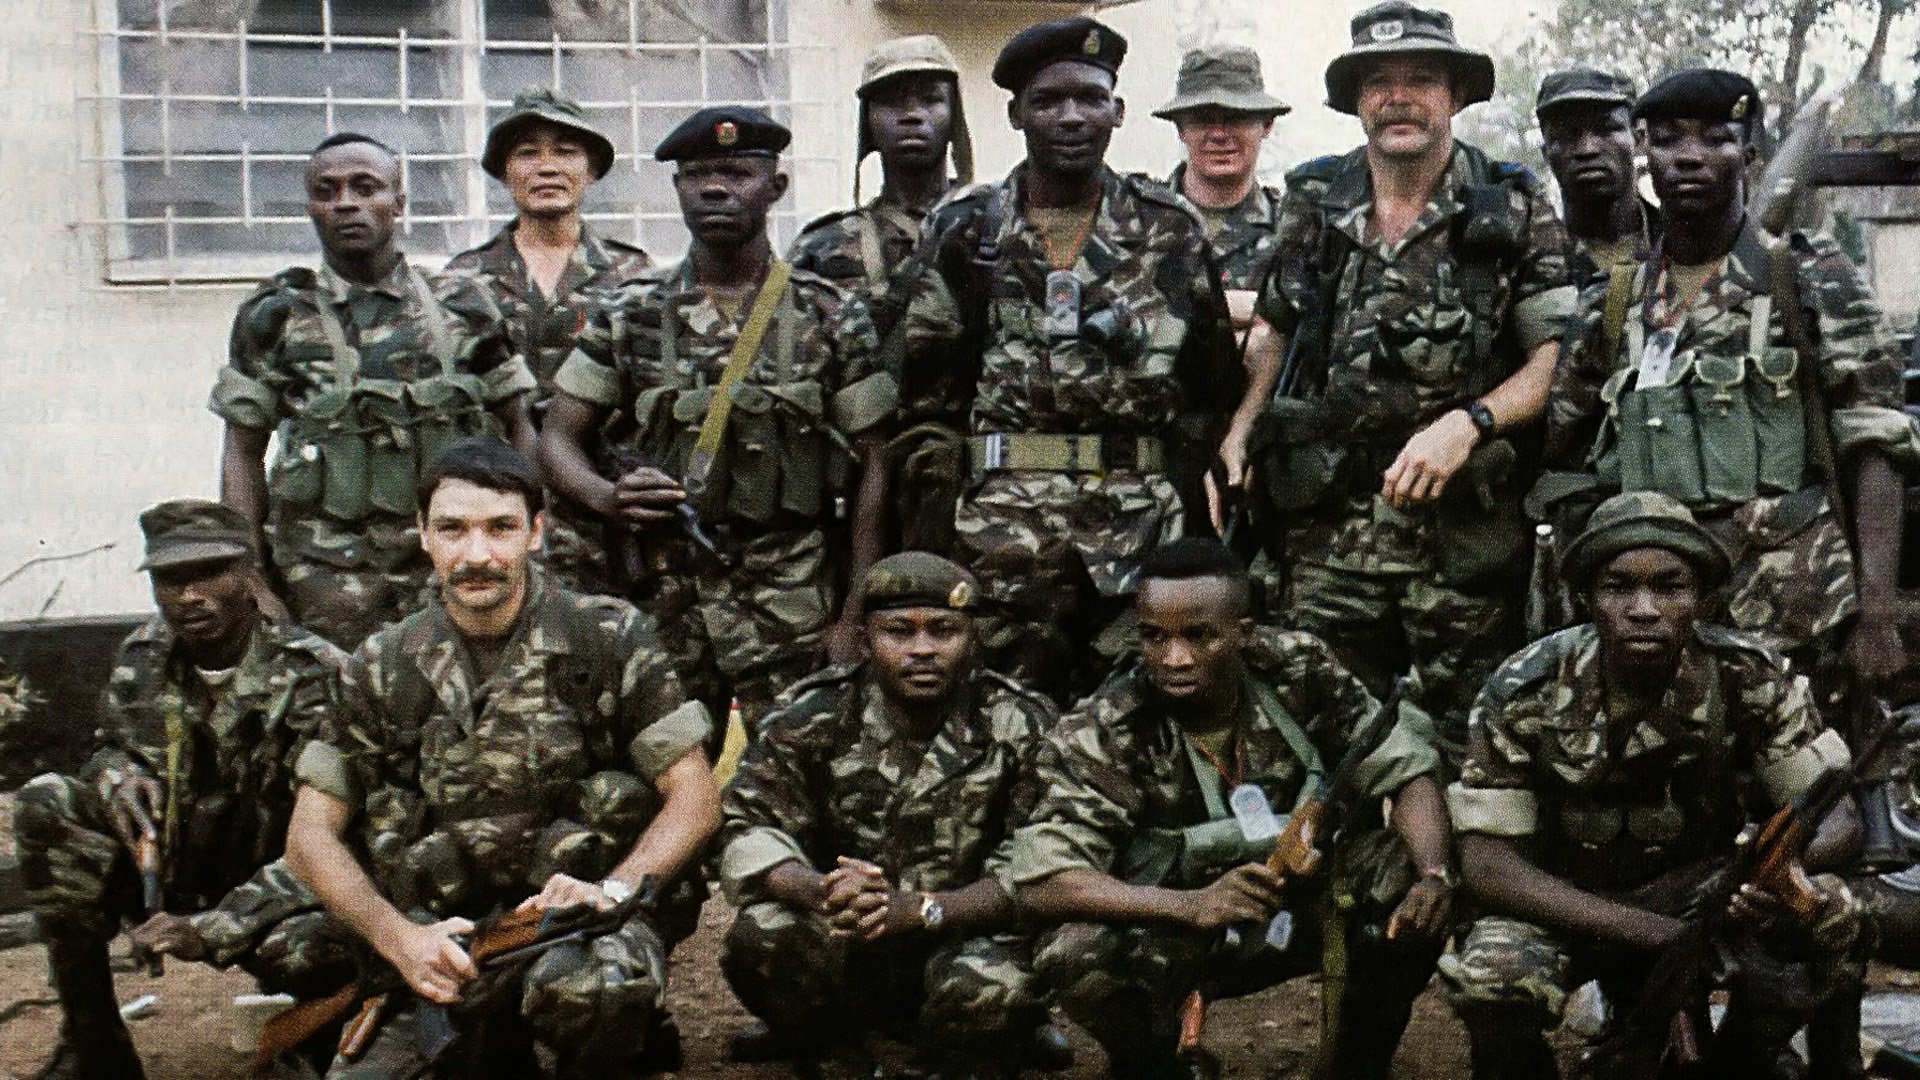 Lt. Col. Robert C. MacKenzie (standing, wings on hat) with some of the Sierra Leone Commando Unit he was training with the Gurkha Security Guards. Lt Andy Myers is 2nd from left, kneeling. Wikimedia Commons photo